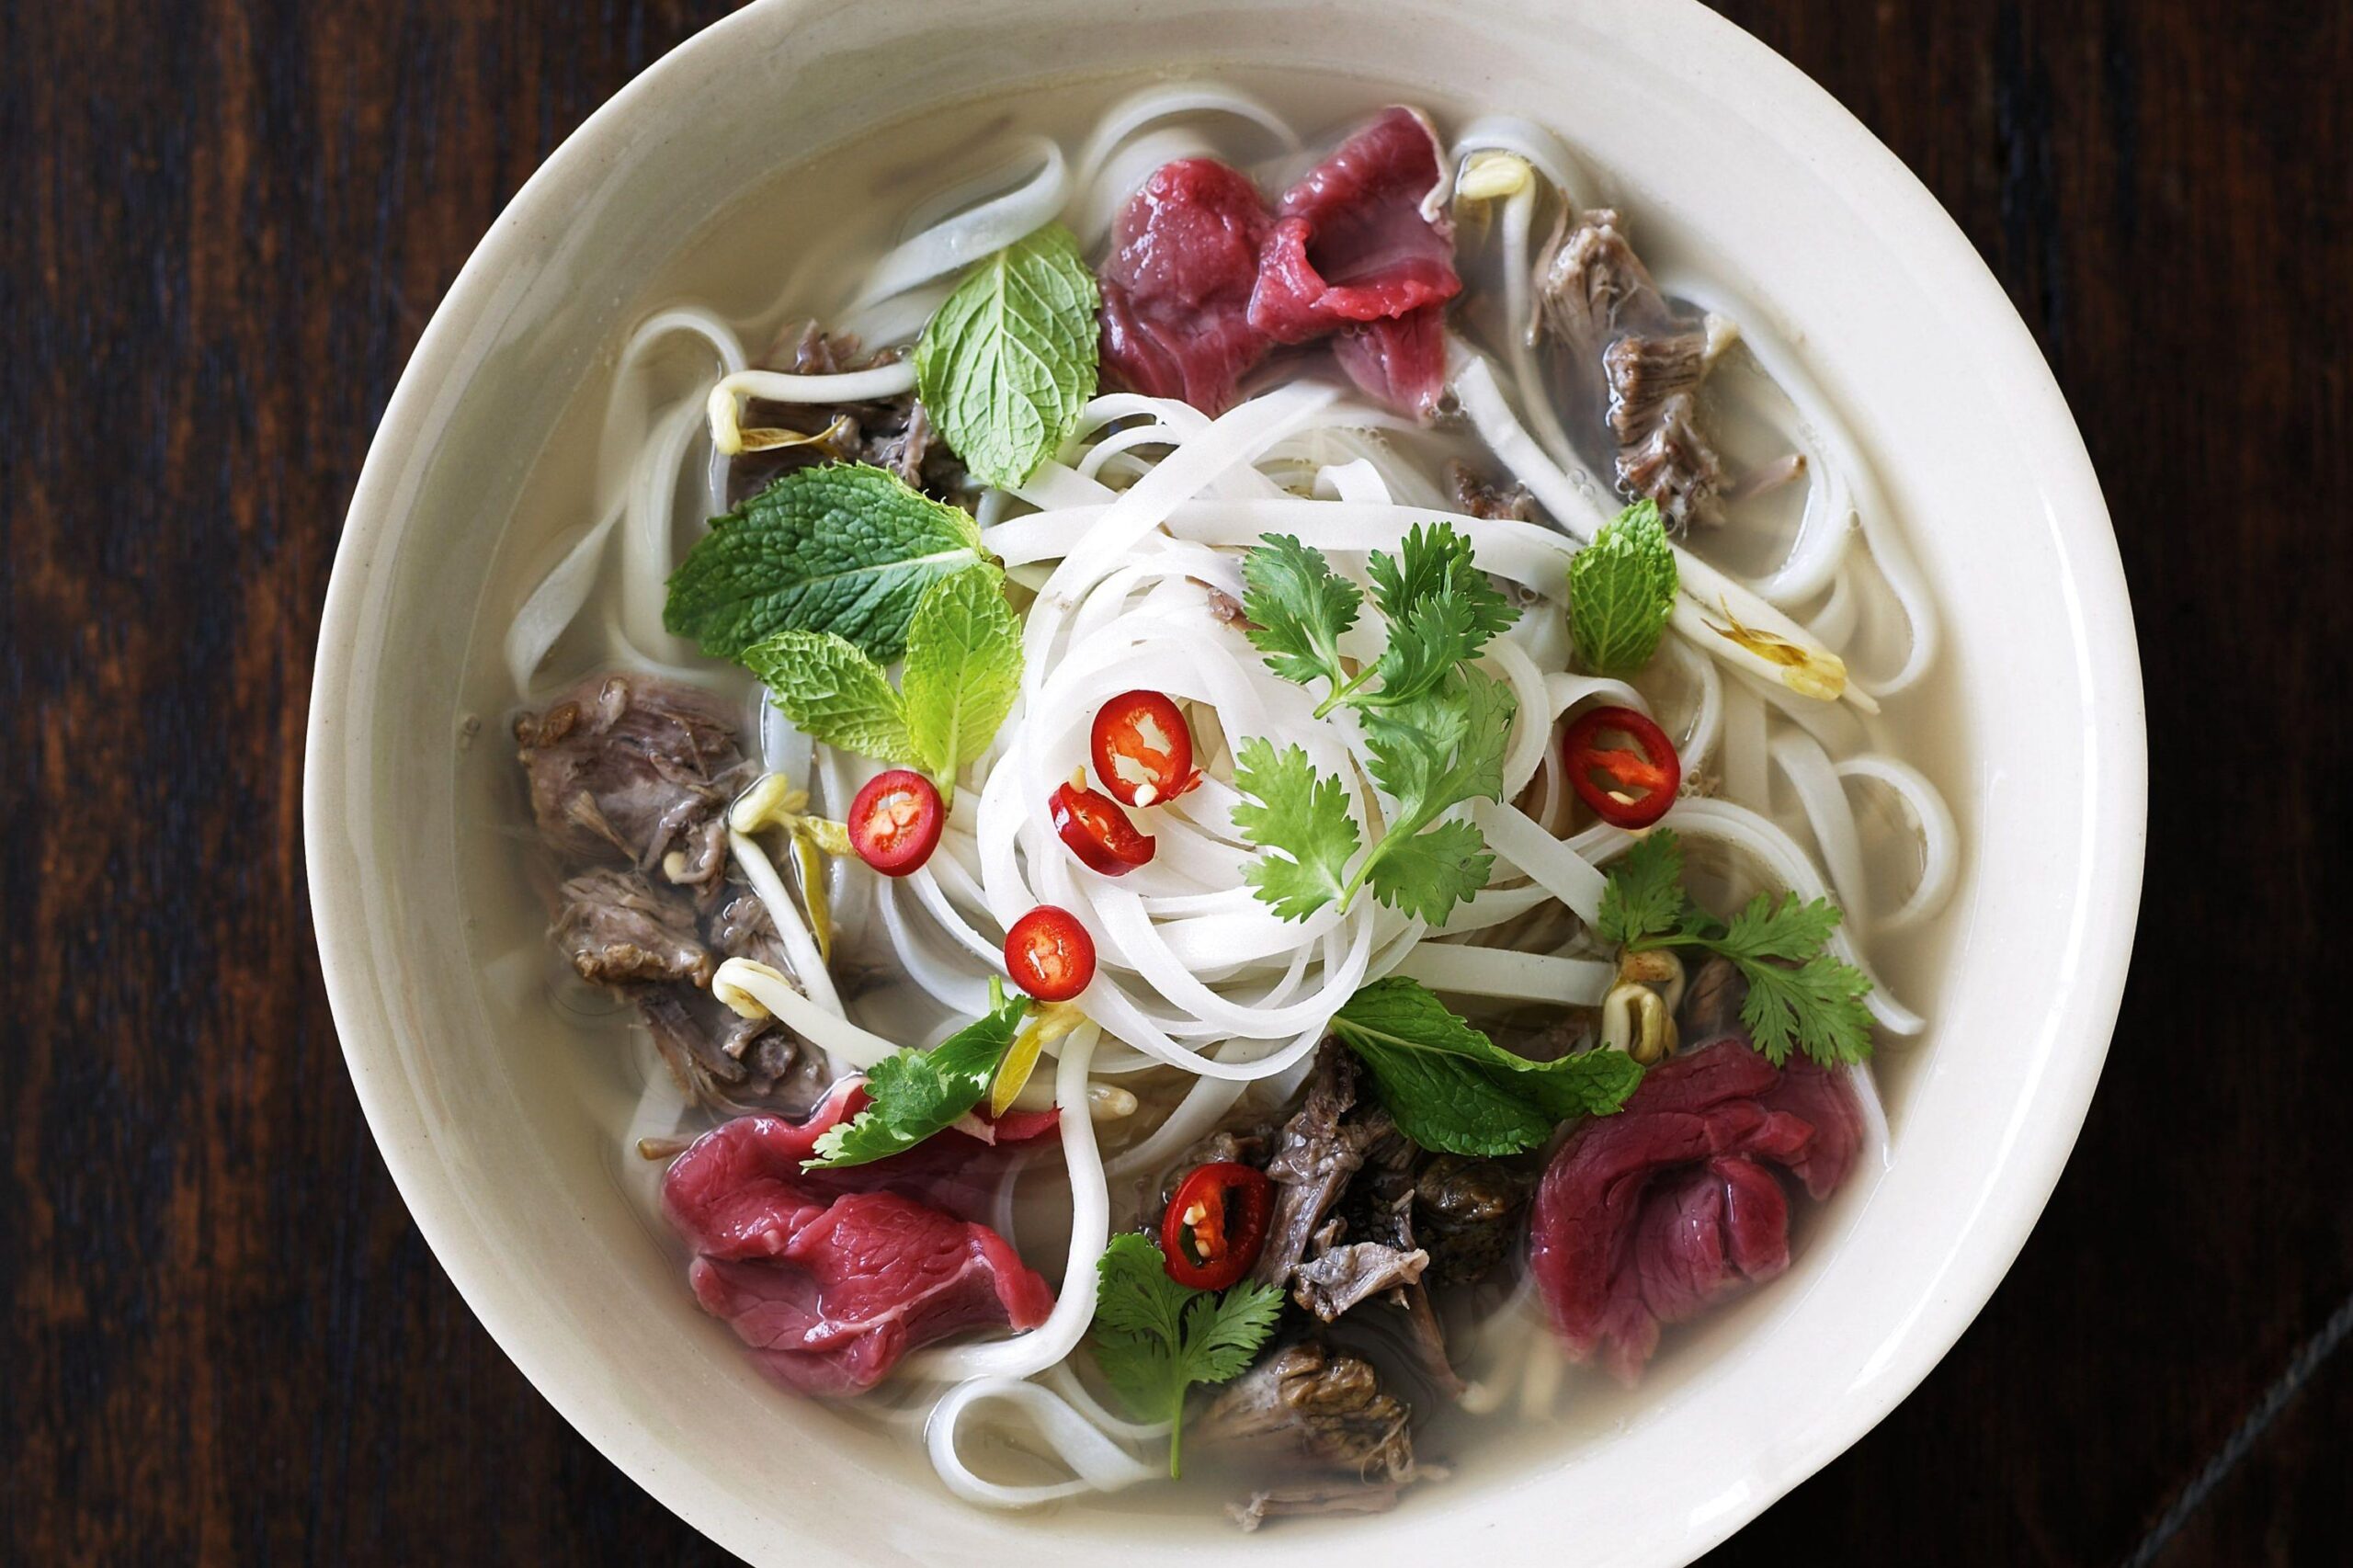  The noodles soak up the broth and add a satisfying chewy texture to the dish